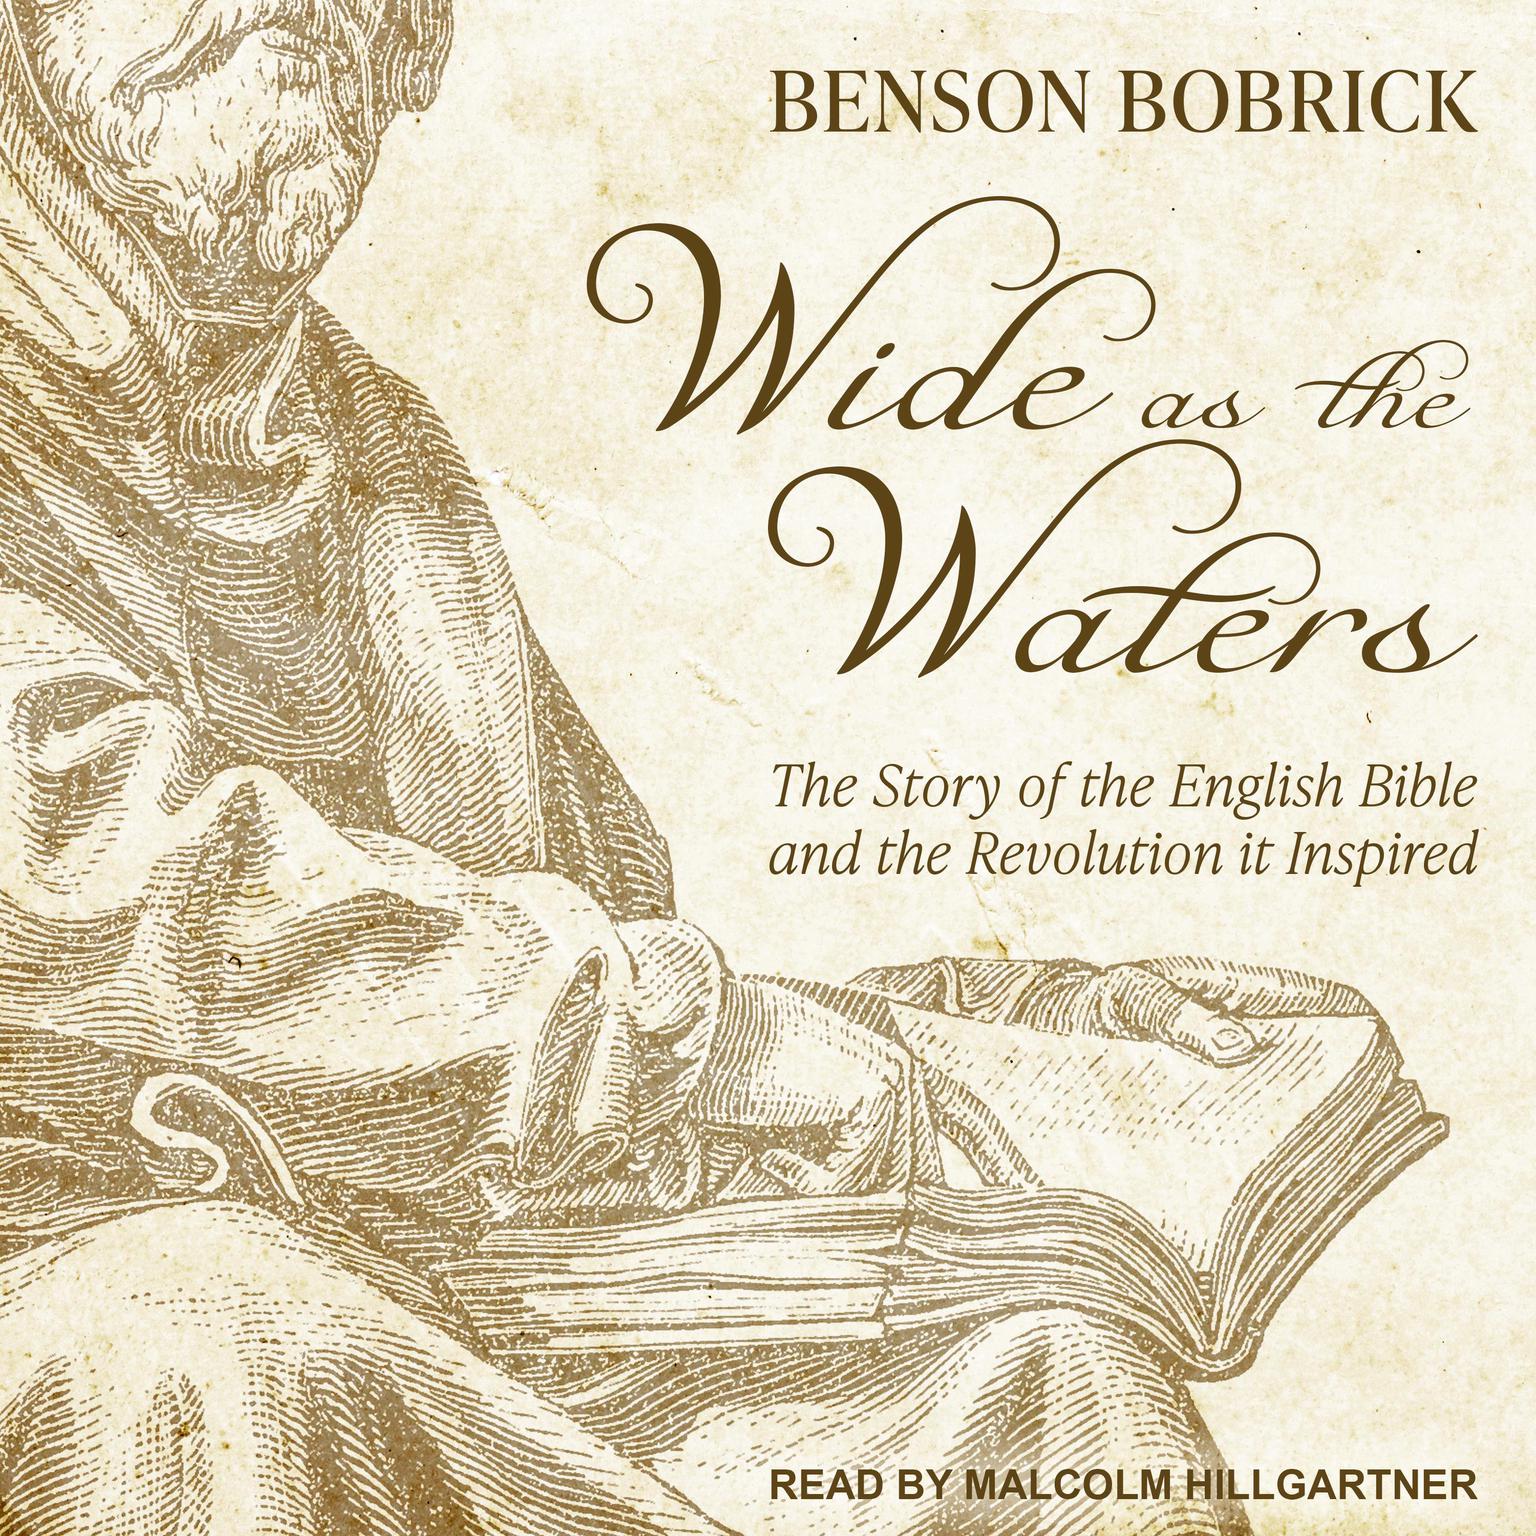 Wide as the Waters: The Story of the English Bible and the Revolution it Inspired Audiobook, by Benson Bobrick